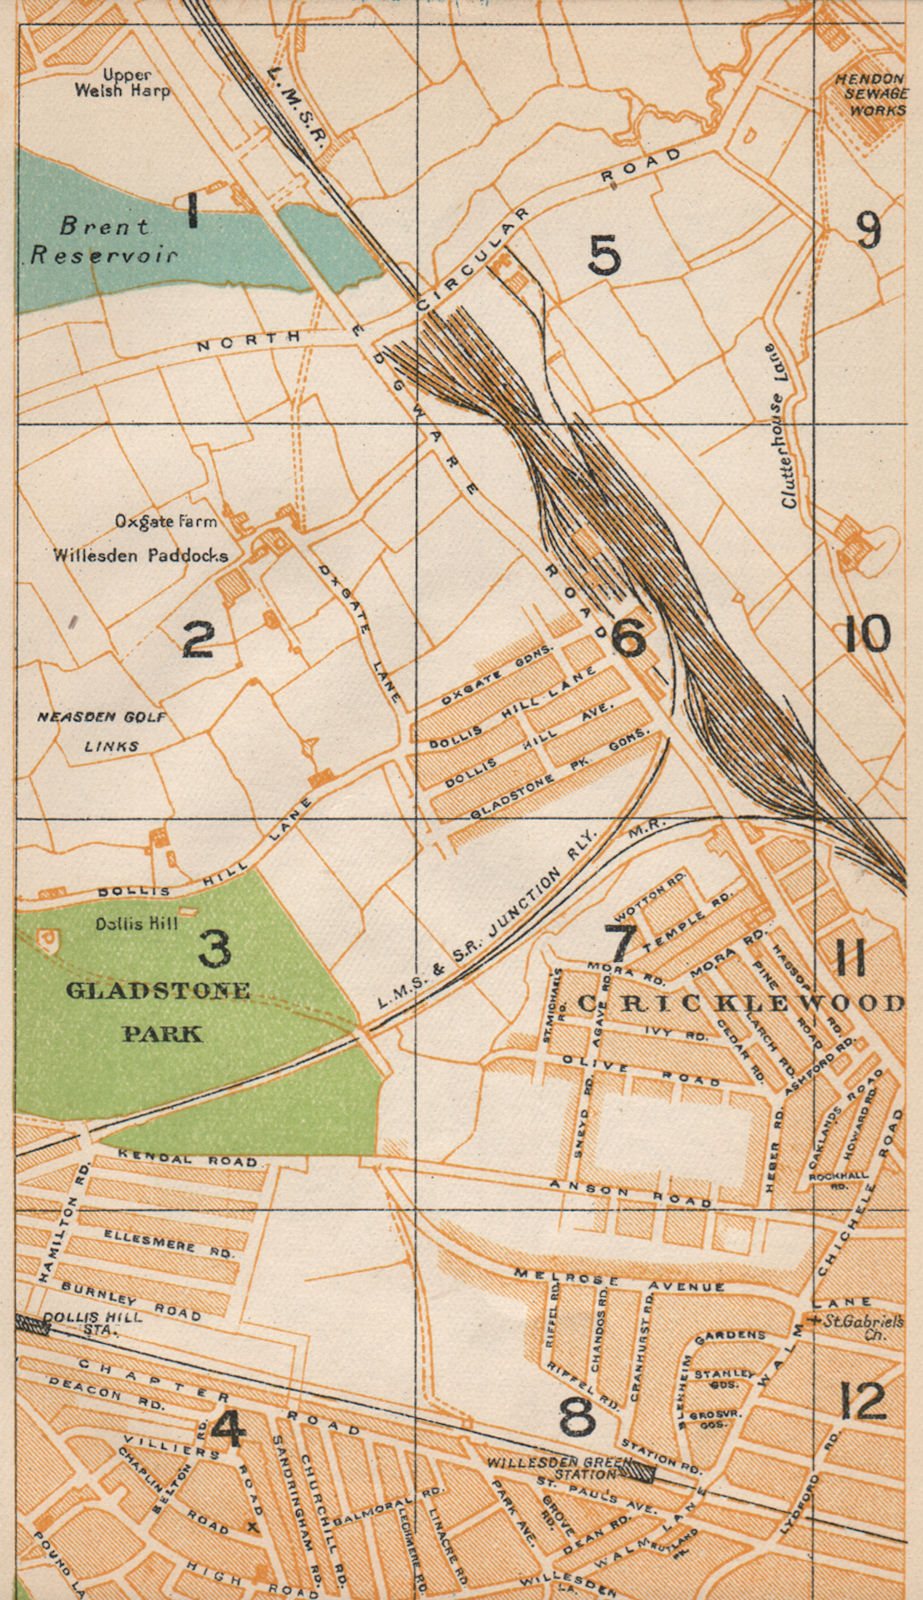 LONDON NW. Gladstone Park Cricklewood Dollis Hill Willesden Green 1927 old map